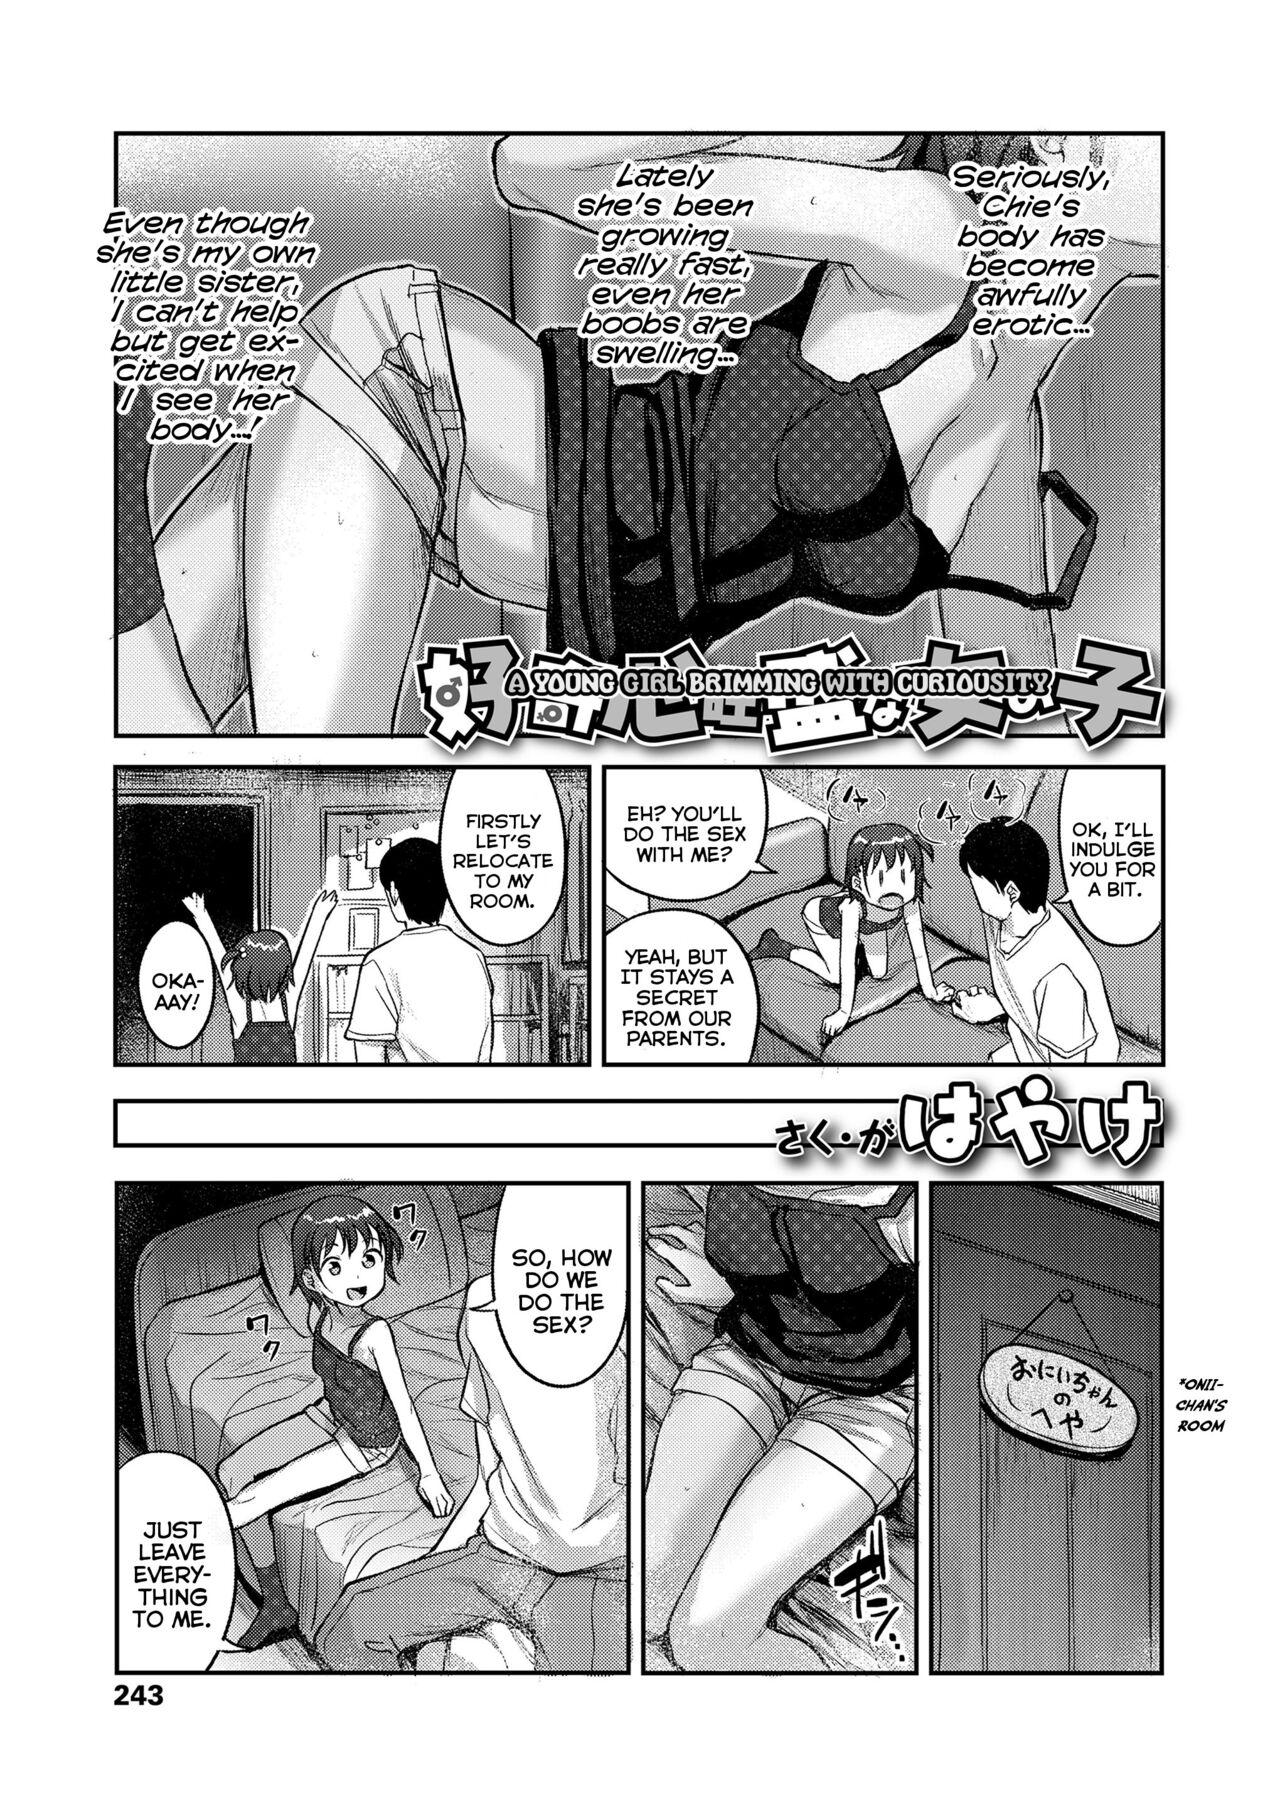 Moan Koukishin Ousei na Onnanoko | A Young Girl Brimming With Curiousity Couch - Page 3